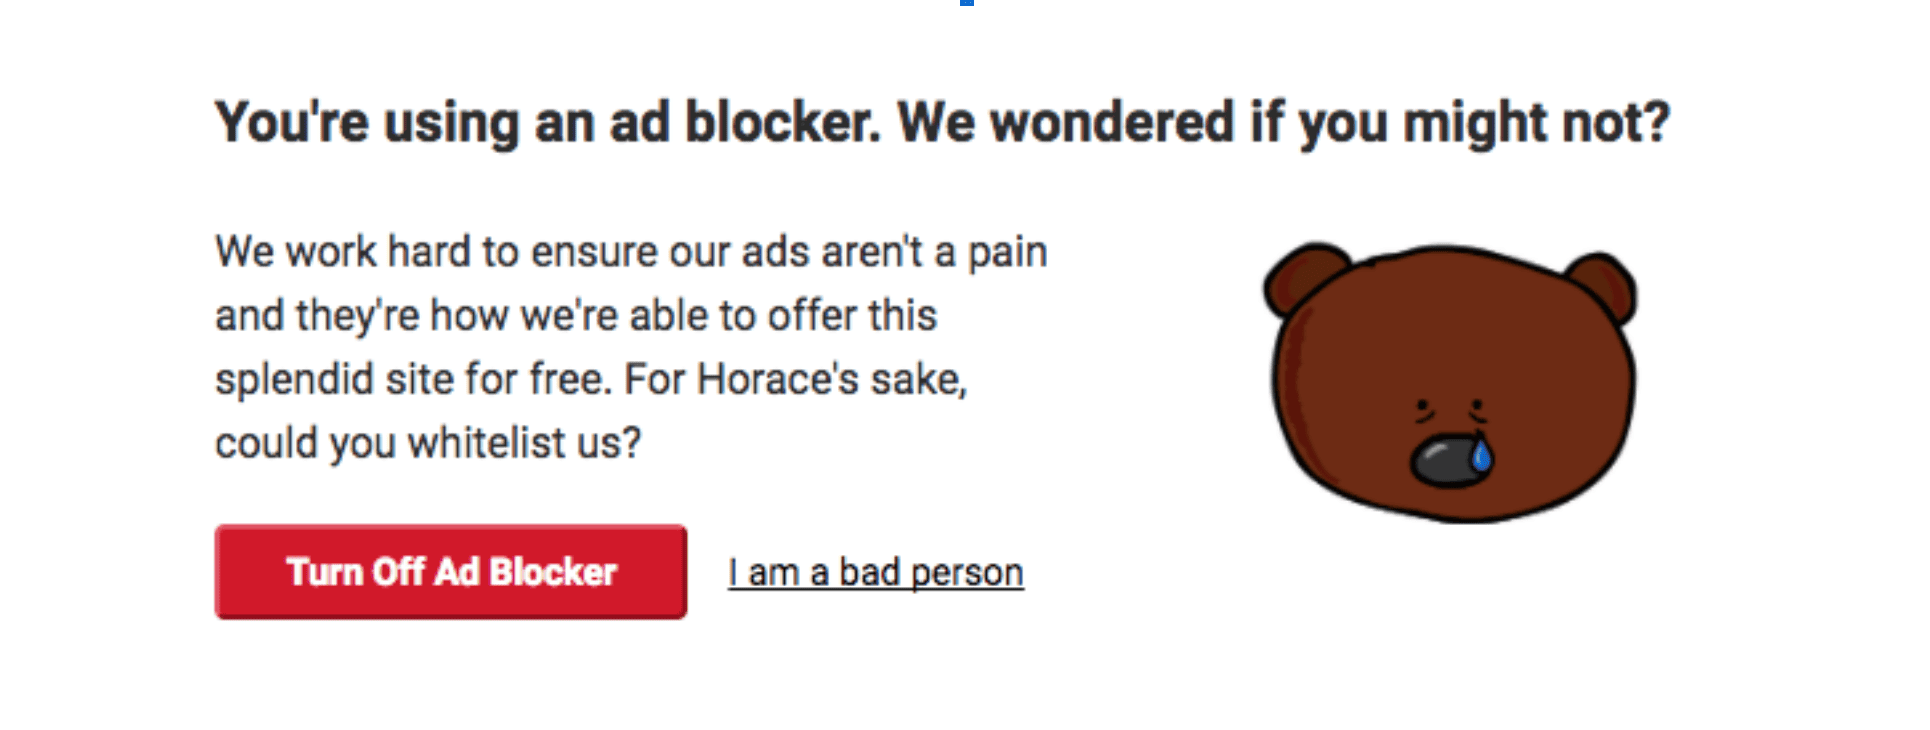 Pop up avec le titre “You’re using an ad blocker.We wondered if you might not?” suivi du texte “We work hard to ensure our ads aren’t a pain and they’re how we’re able to offer the splendid site for free. For Horace’s sake, could you whitelist us?” avec le bouton primaire “Turn Off Ad Blocker” et le secondaire “I am a bad person”